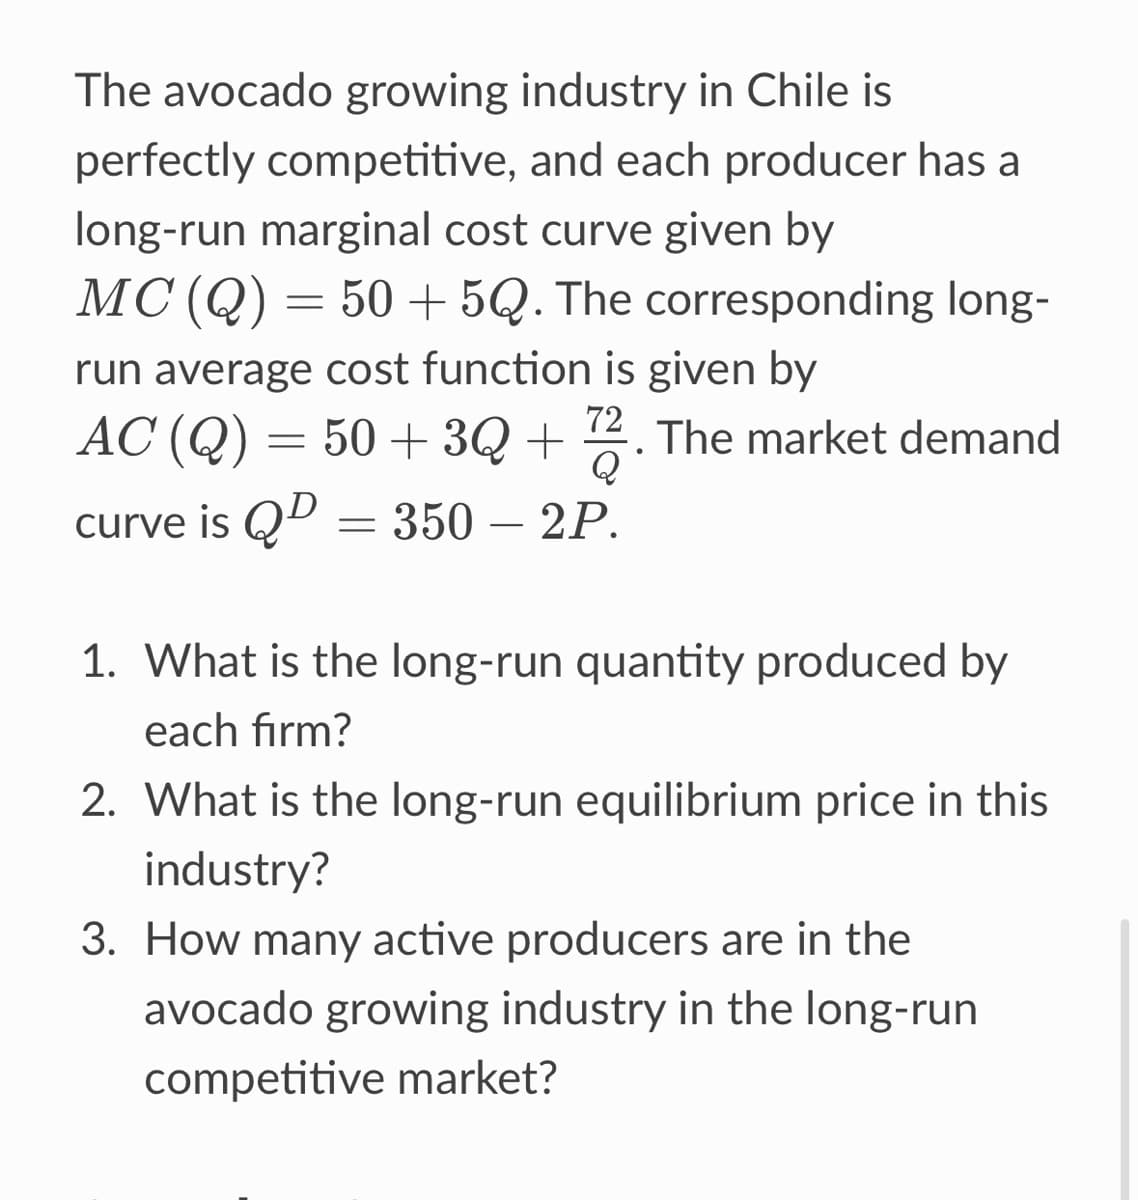 The avocado growing industry in Chile is
perfectly competitive, and each producer has a
long-run marginal cost curve given by
MC (Q) = 50+5Q. The corresponding long-
run average cost function is given by
AC (Q) = 50+ 3Q+72. The market demand
curve is QD = 350 – 2P.
1. What is the long-run quantity produced by
each firm?
2. What is the long-run equilibrium price in this
industry?
3. How many active producers are in the
avocado growing industry in the long-run
competitive market?